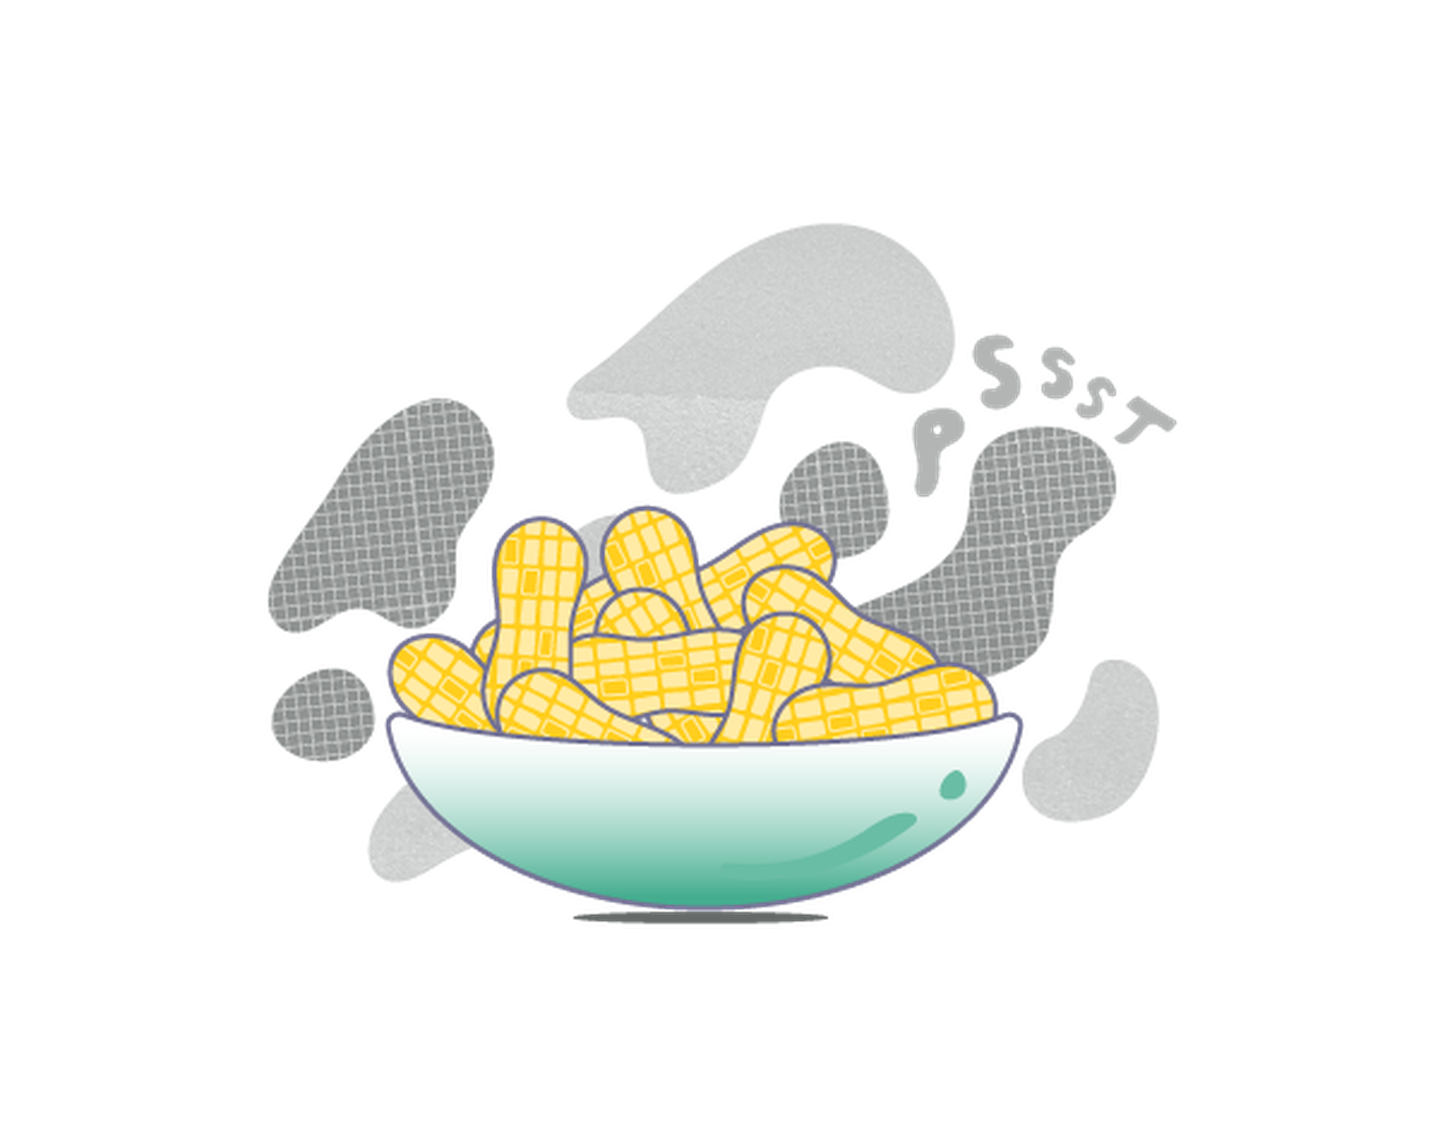 Illustration of peanuts in a bowl